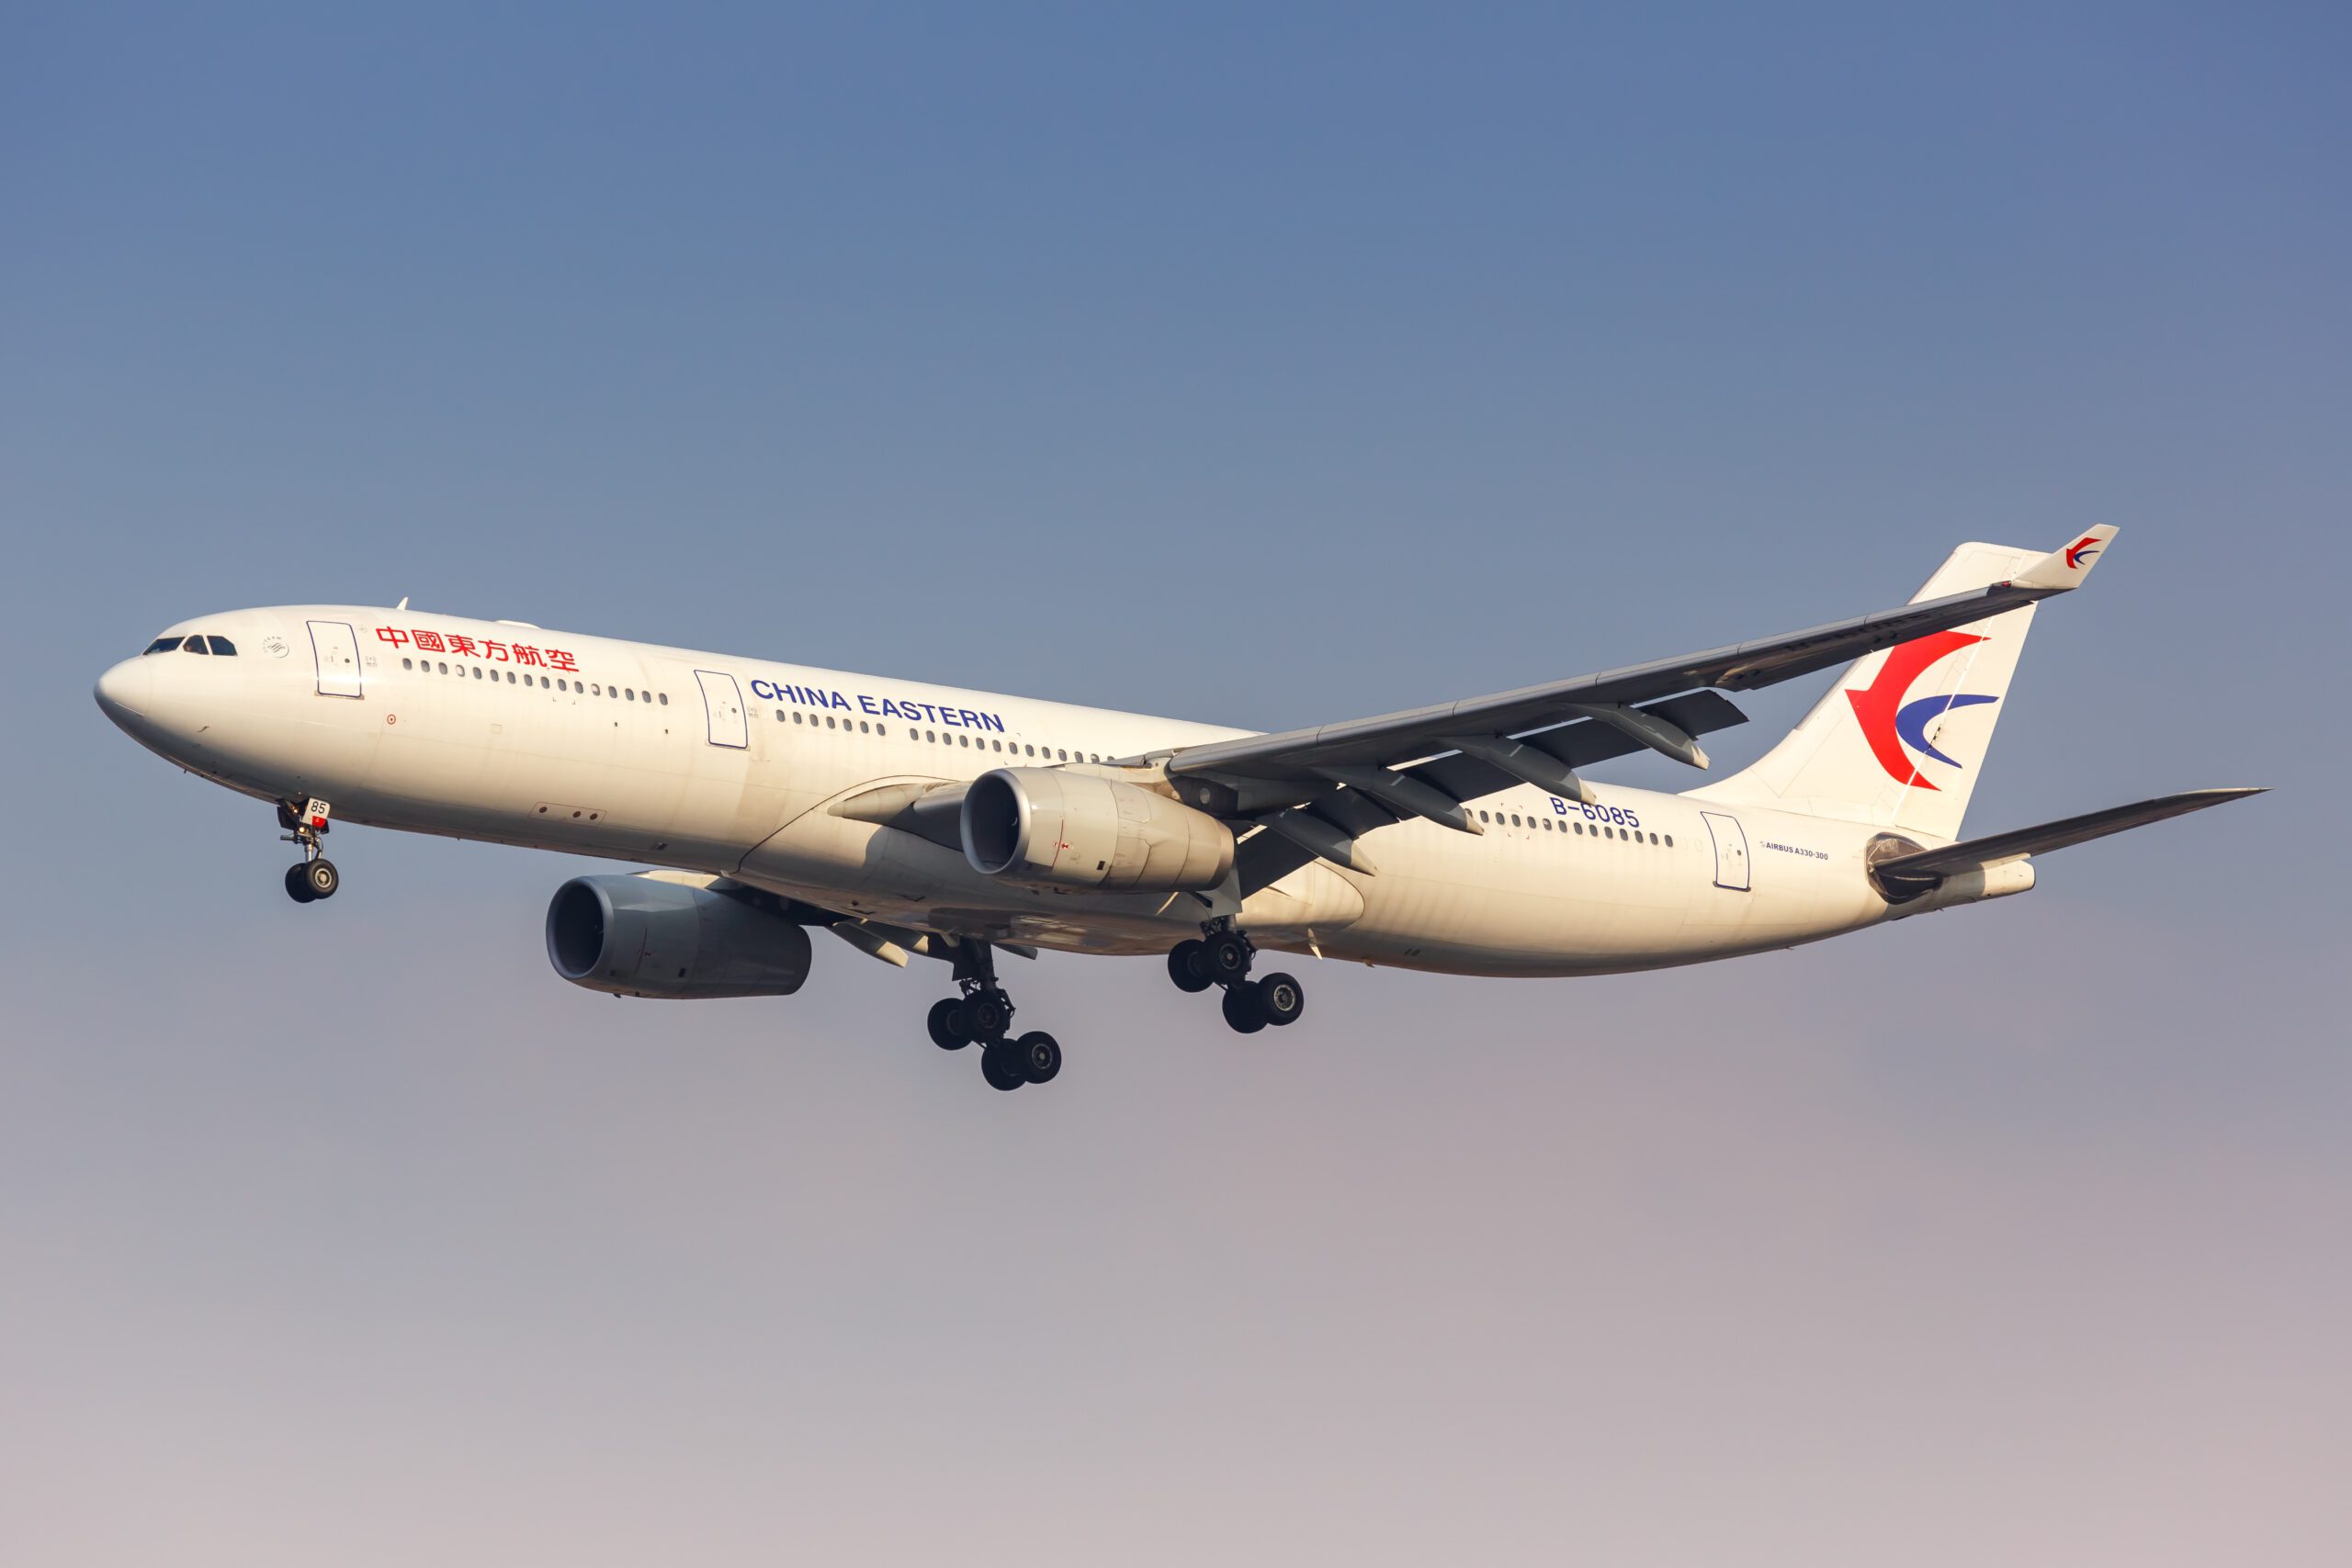 Watch: Passengers On China Eastern Airbus A330 to Hong Kong Left 